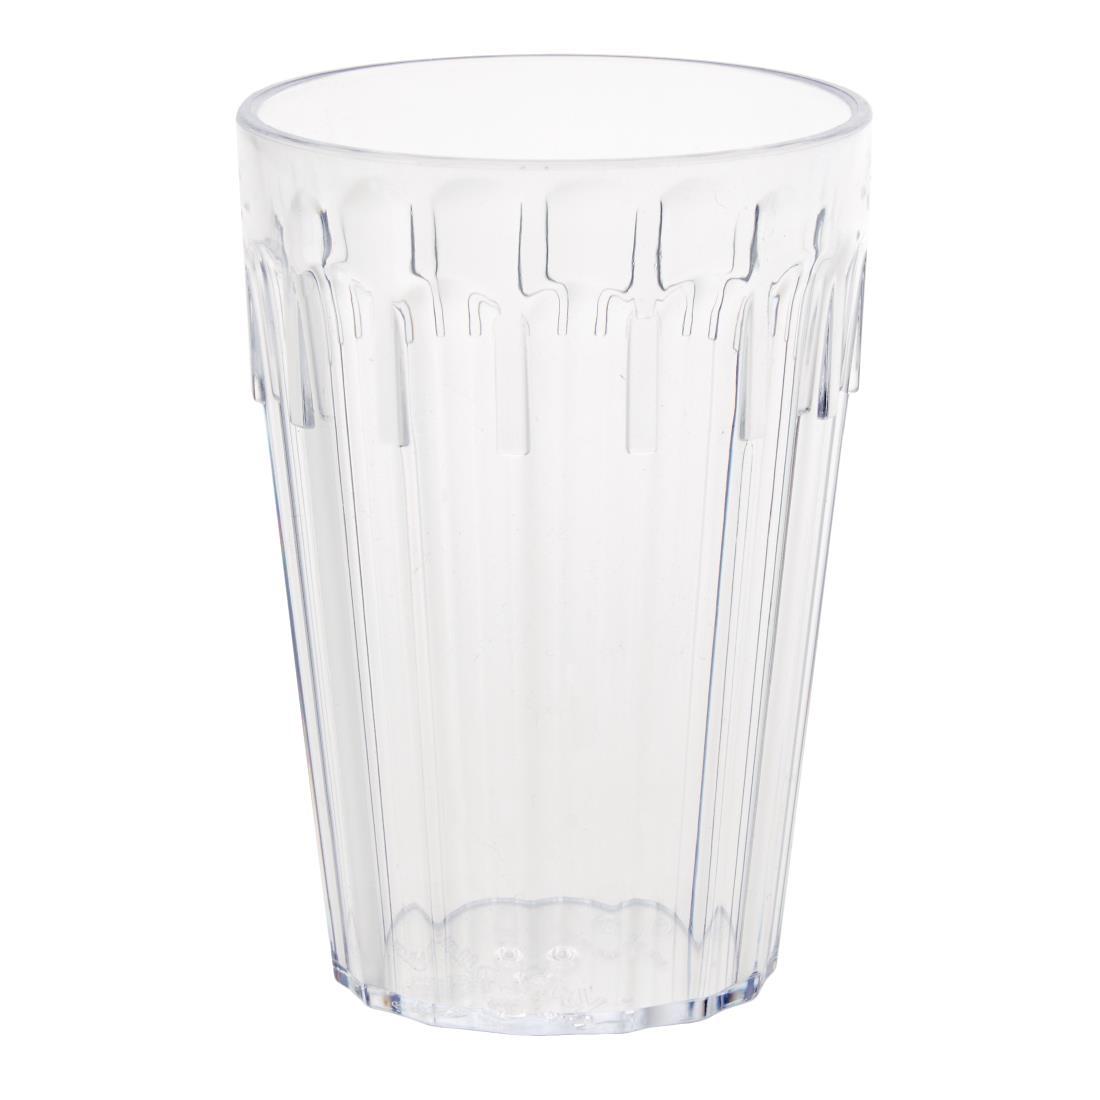 Olympia Kristallon Polycarbonate Tumblers 255ml (Pack of 12) - K577  - 1